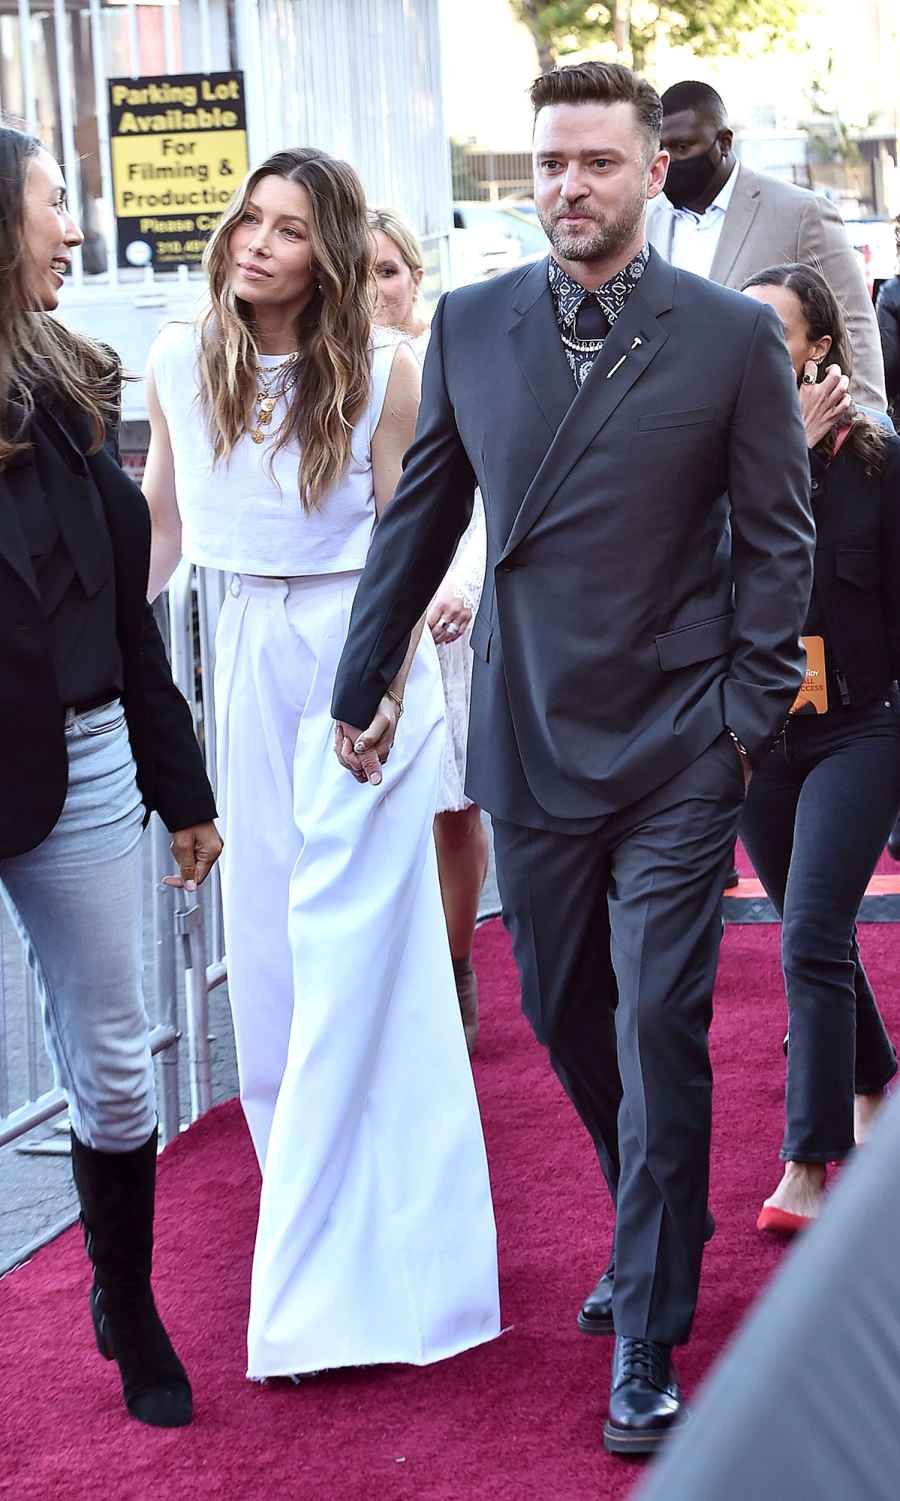 Jessica Biel and Justin Timberlake Have Red Carpet Date Night at Candy Premiere 5